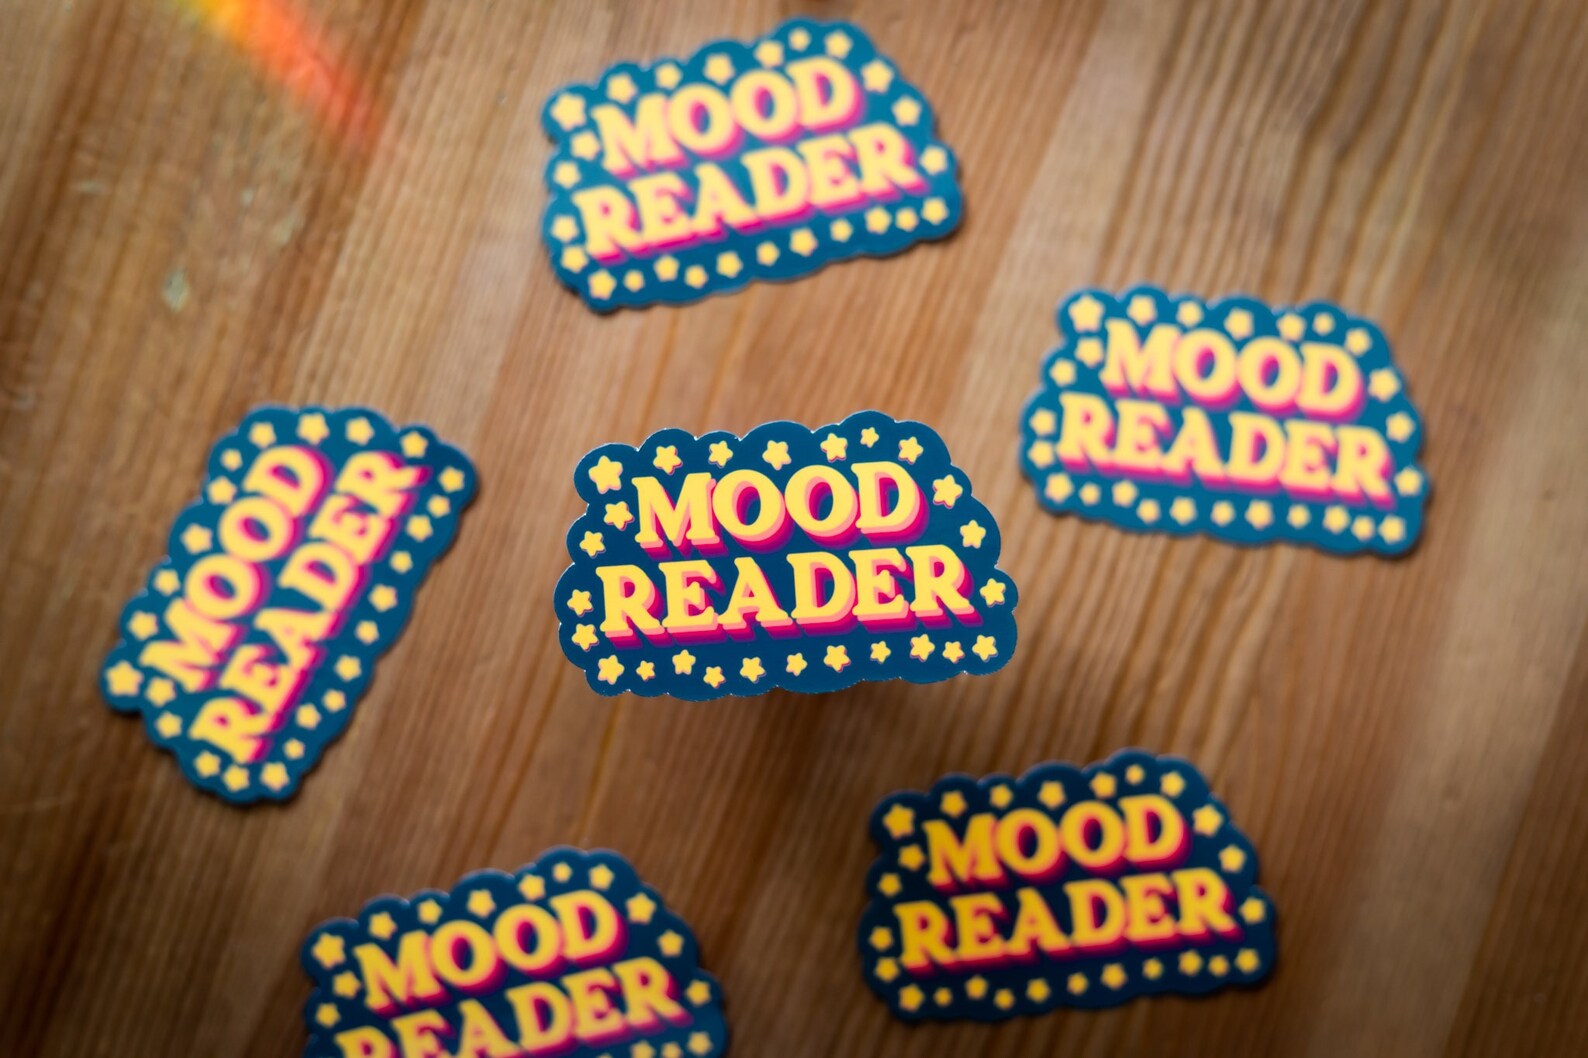 magnet in bright colors that reads "mood reader."